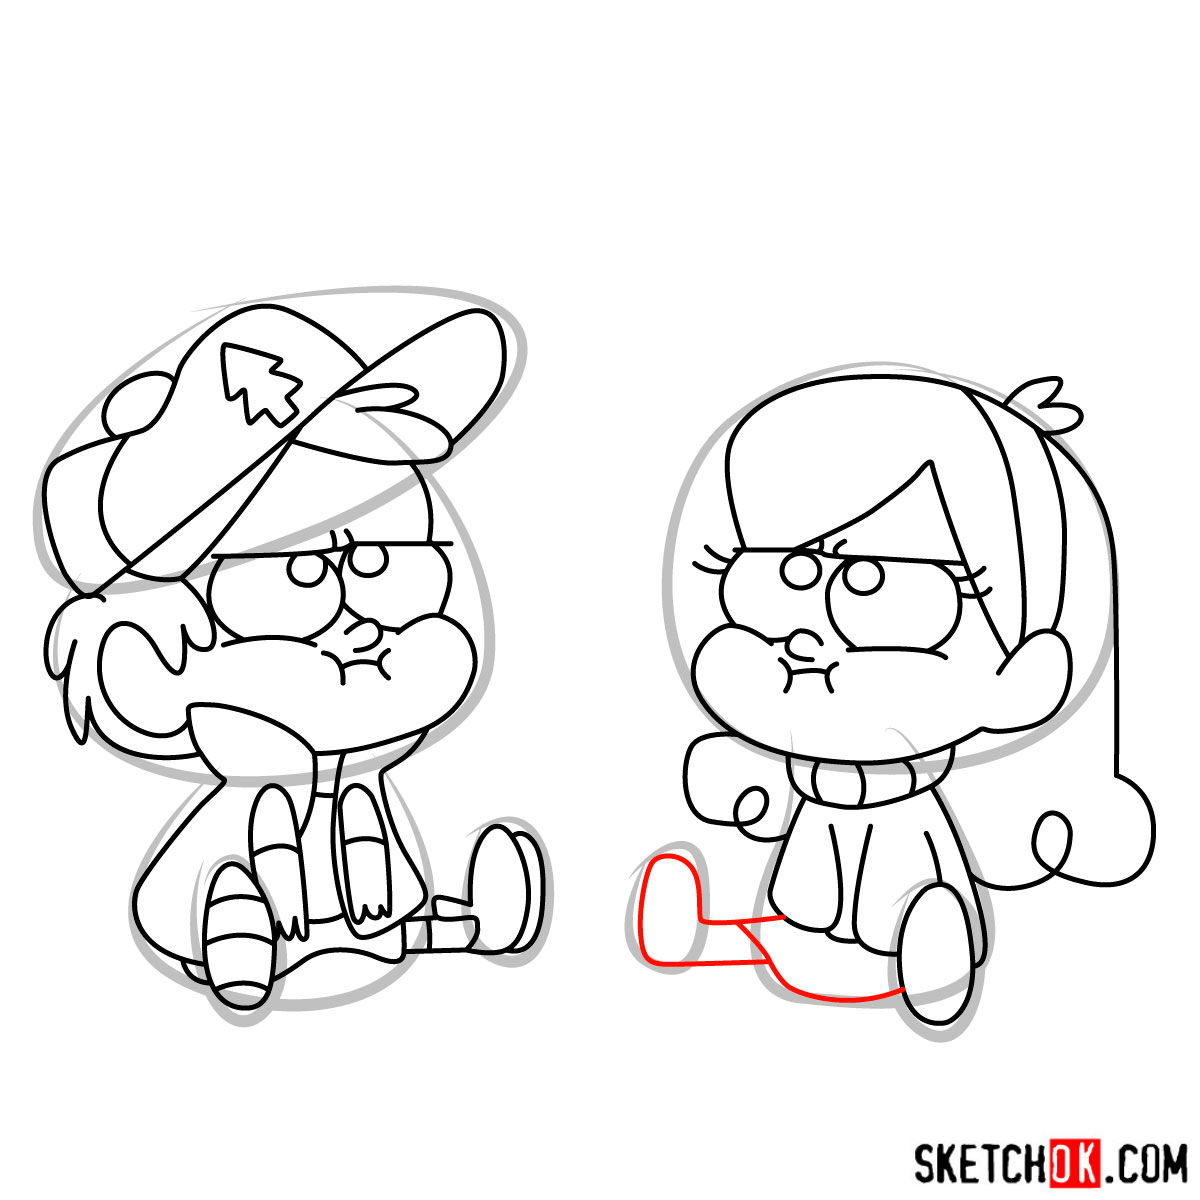 How to draw Dipper and Mabel Pines chibi style - step 14